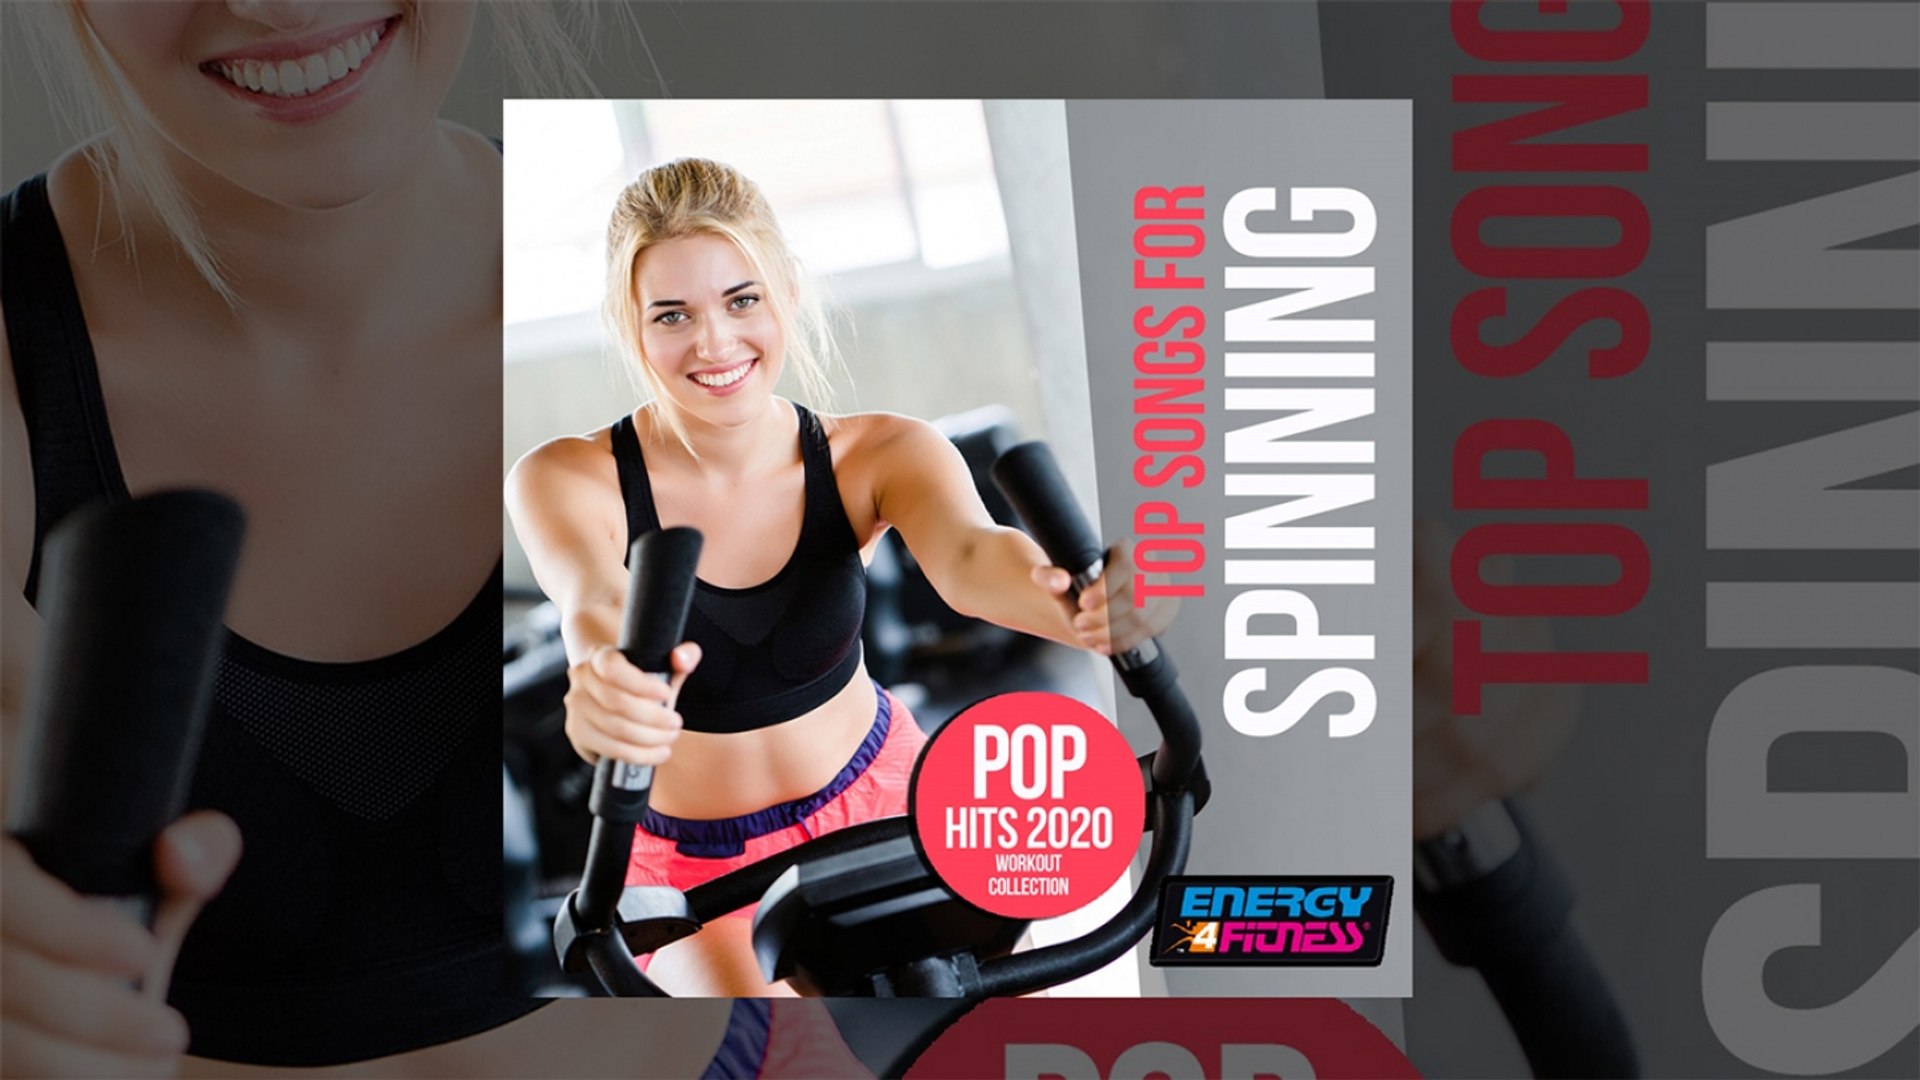 E4F - Top Songs For Spinning Pop Hits 2020 Workout Collection - Fitness & Music 2020